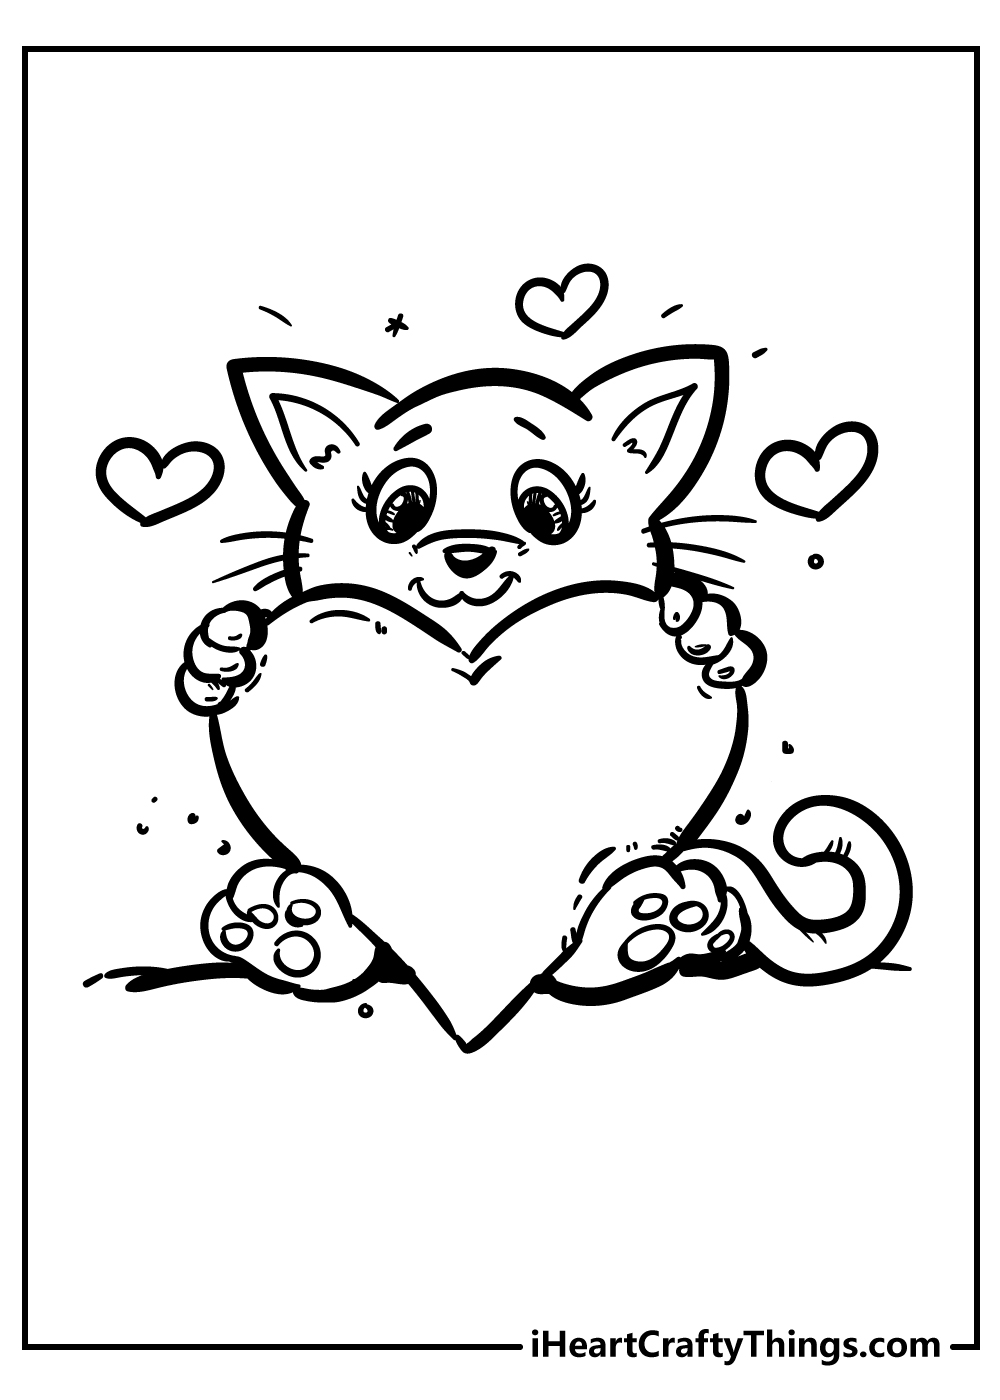 black-and-white heart coloring pages